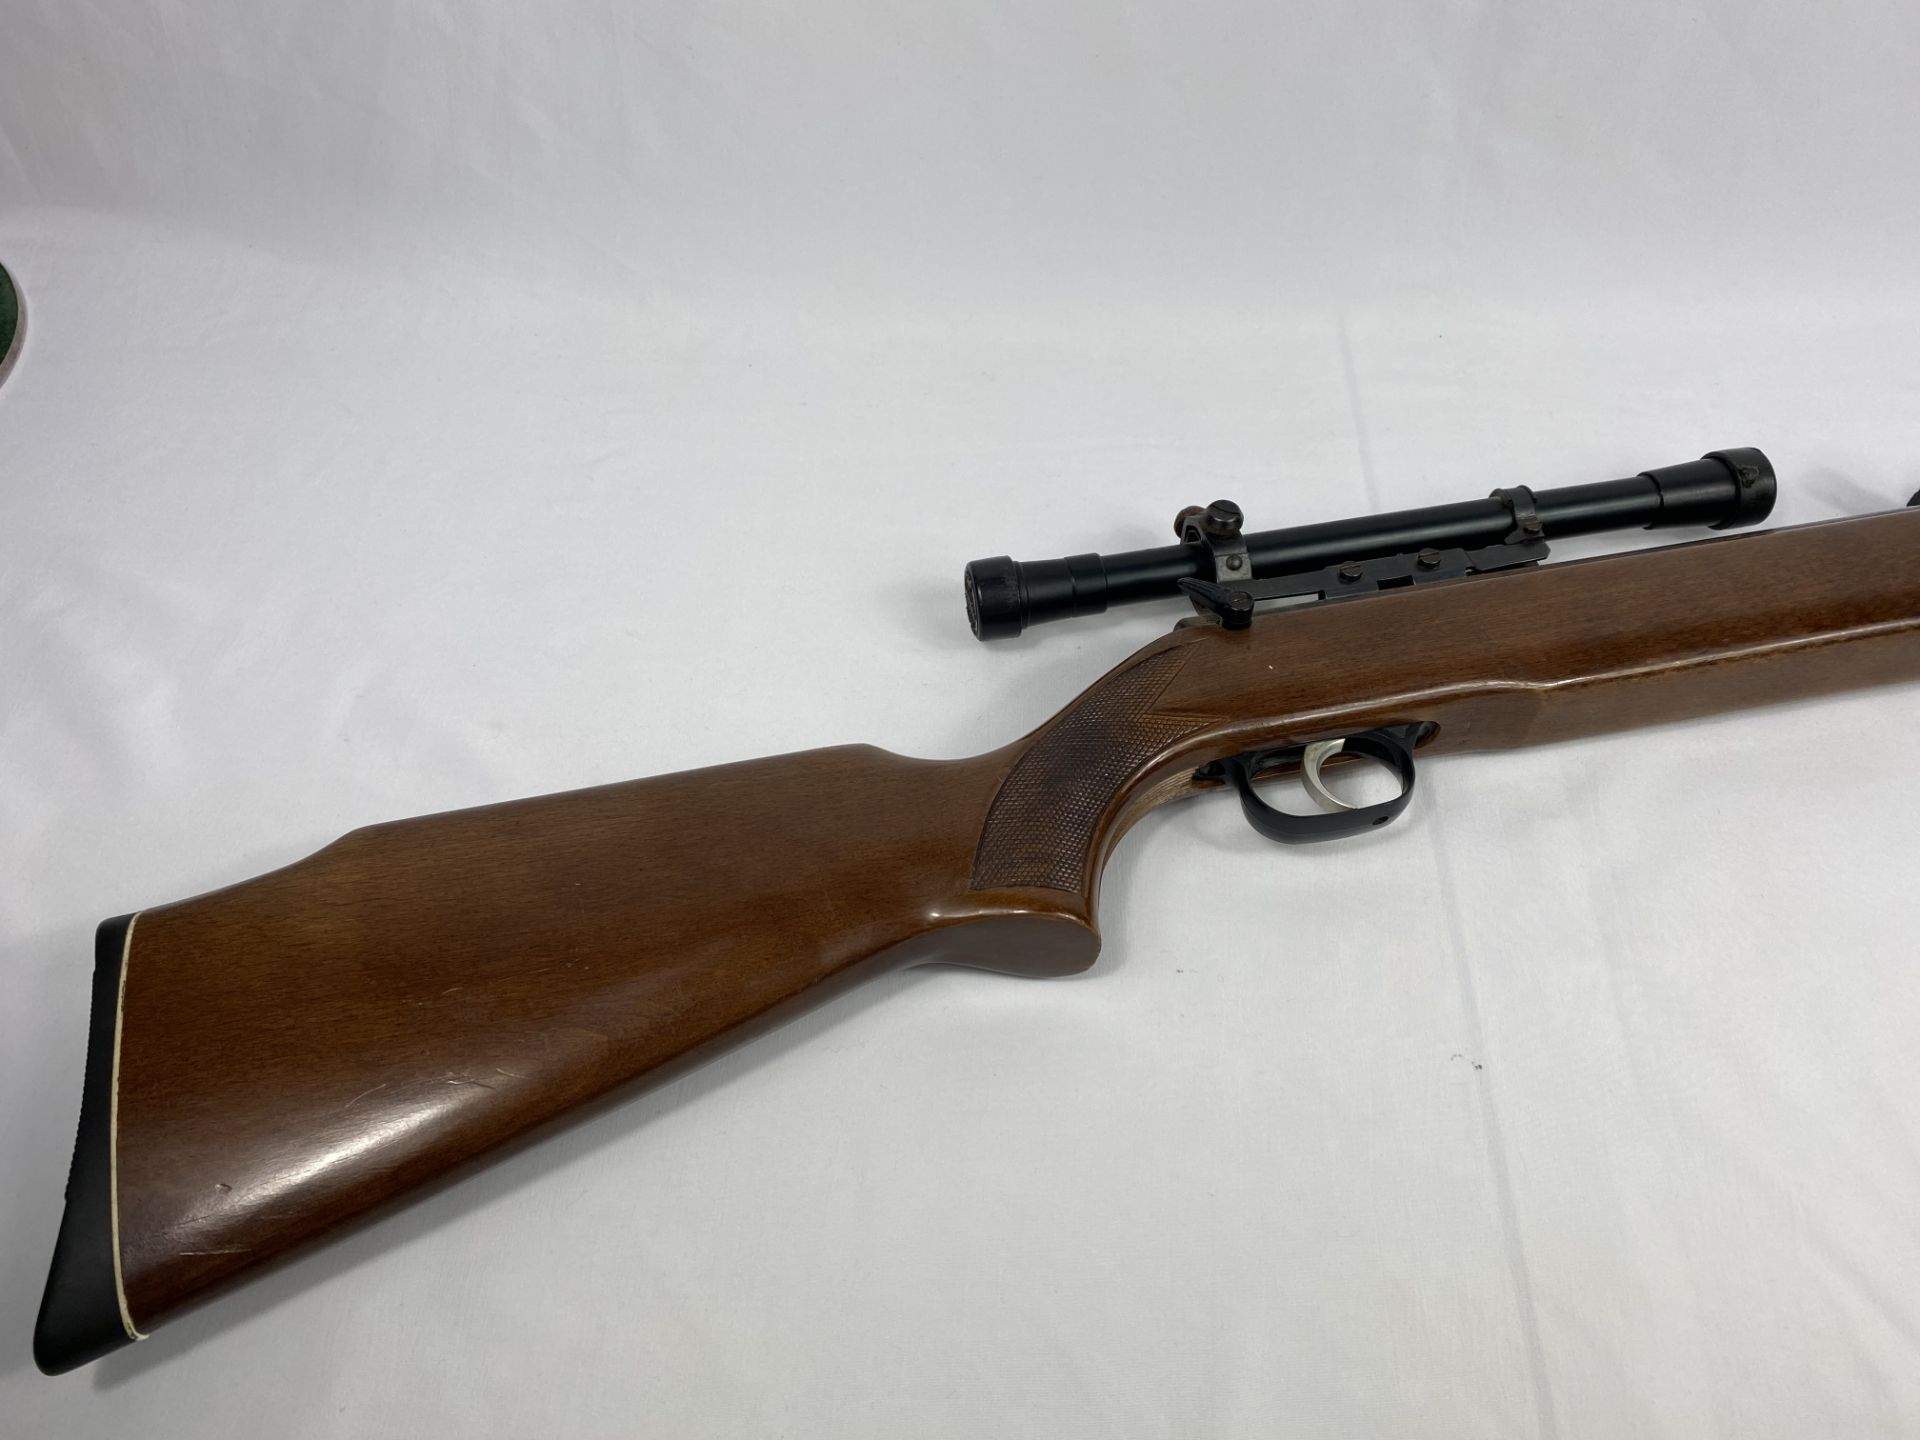 Diana Series 70 air rifle with 3x telescopic sight - Image 2 of 5